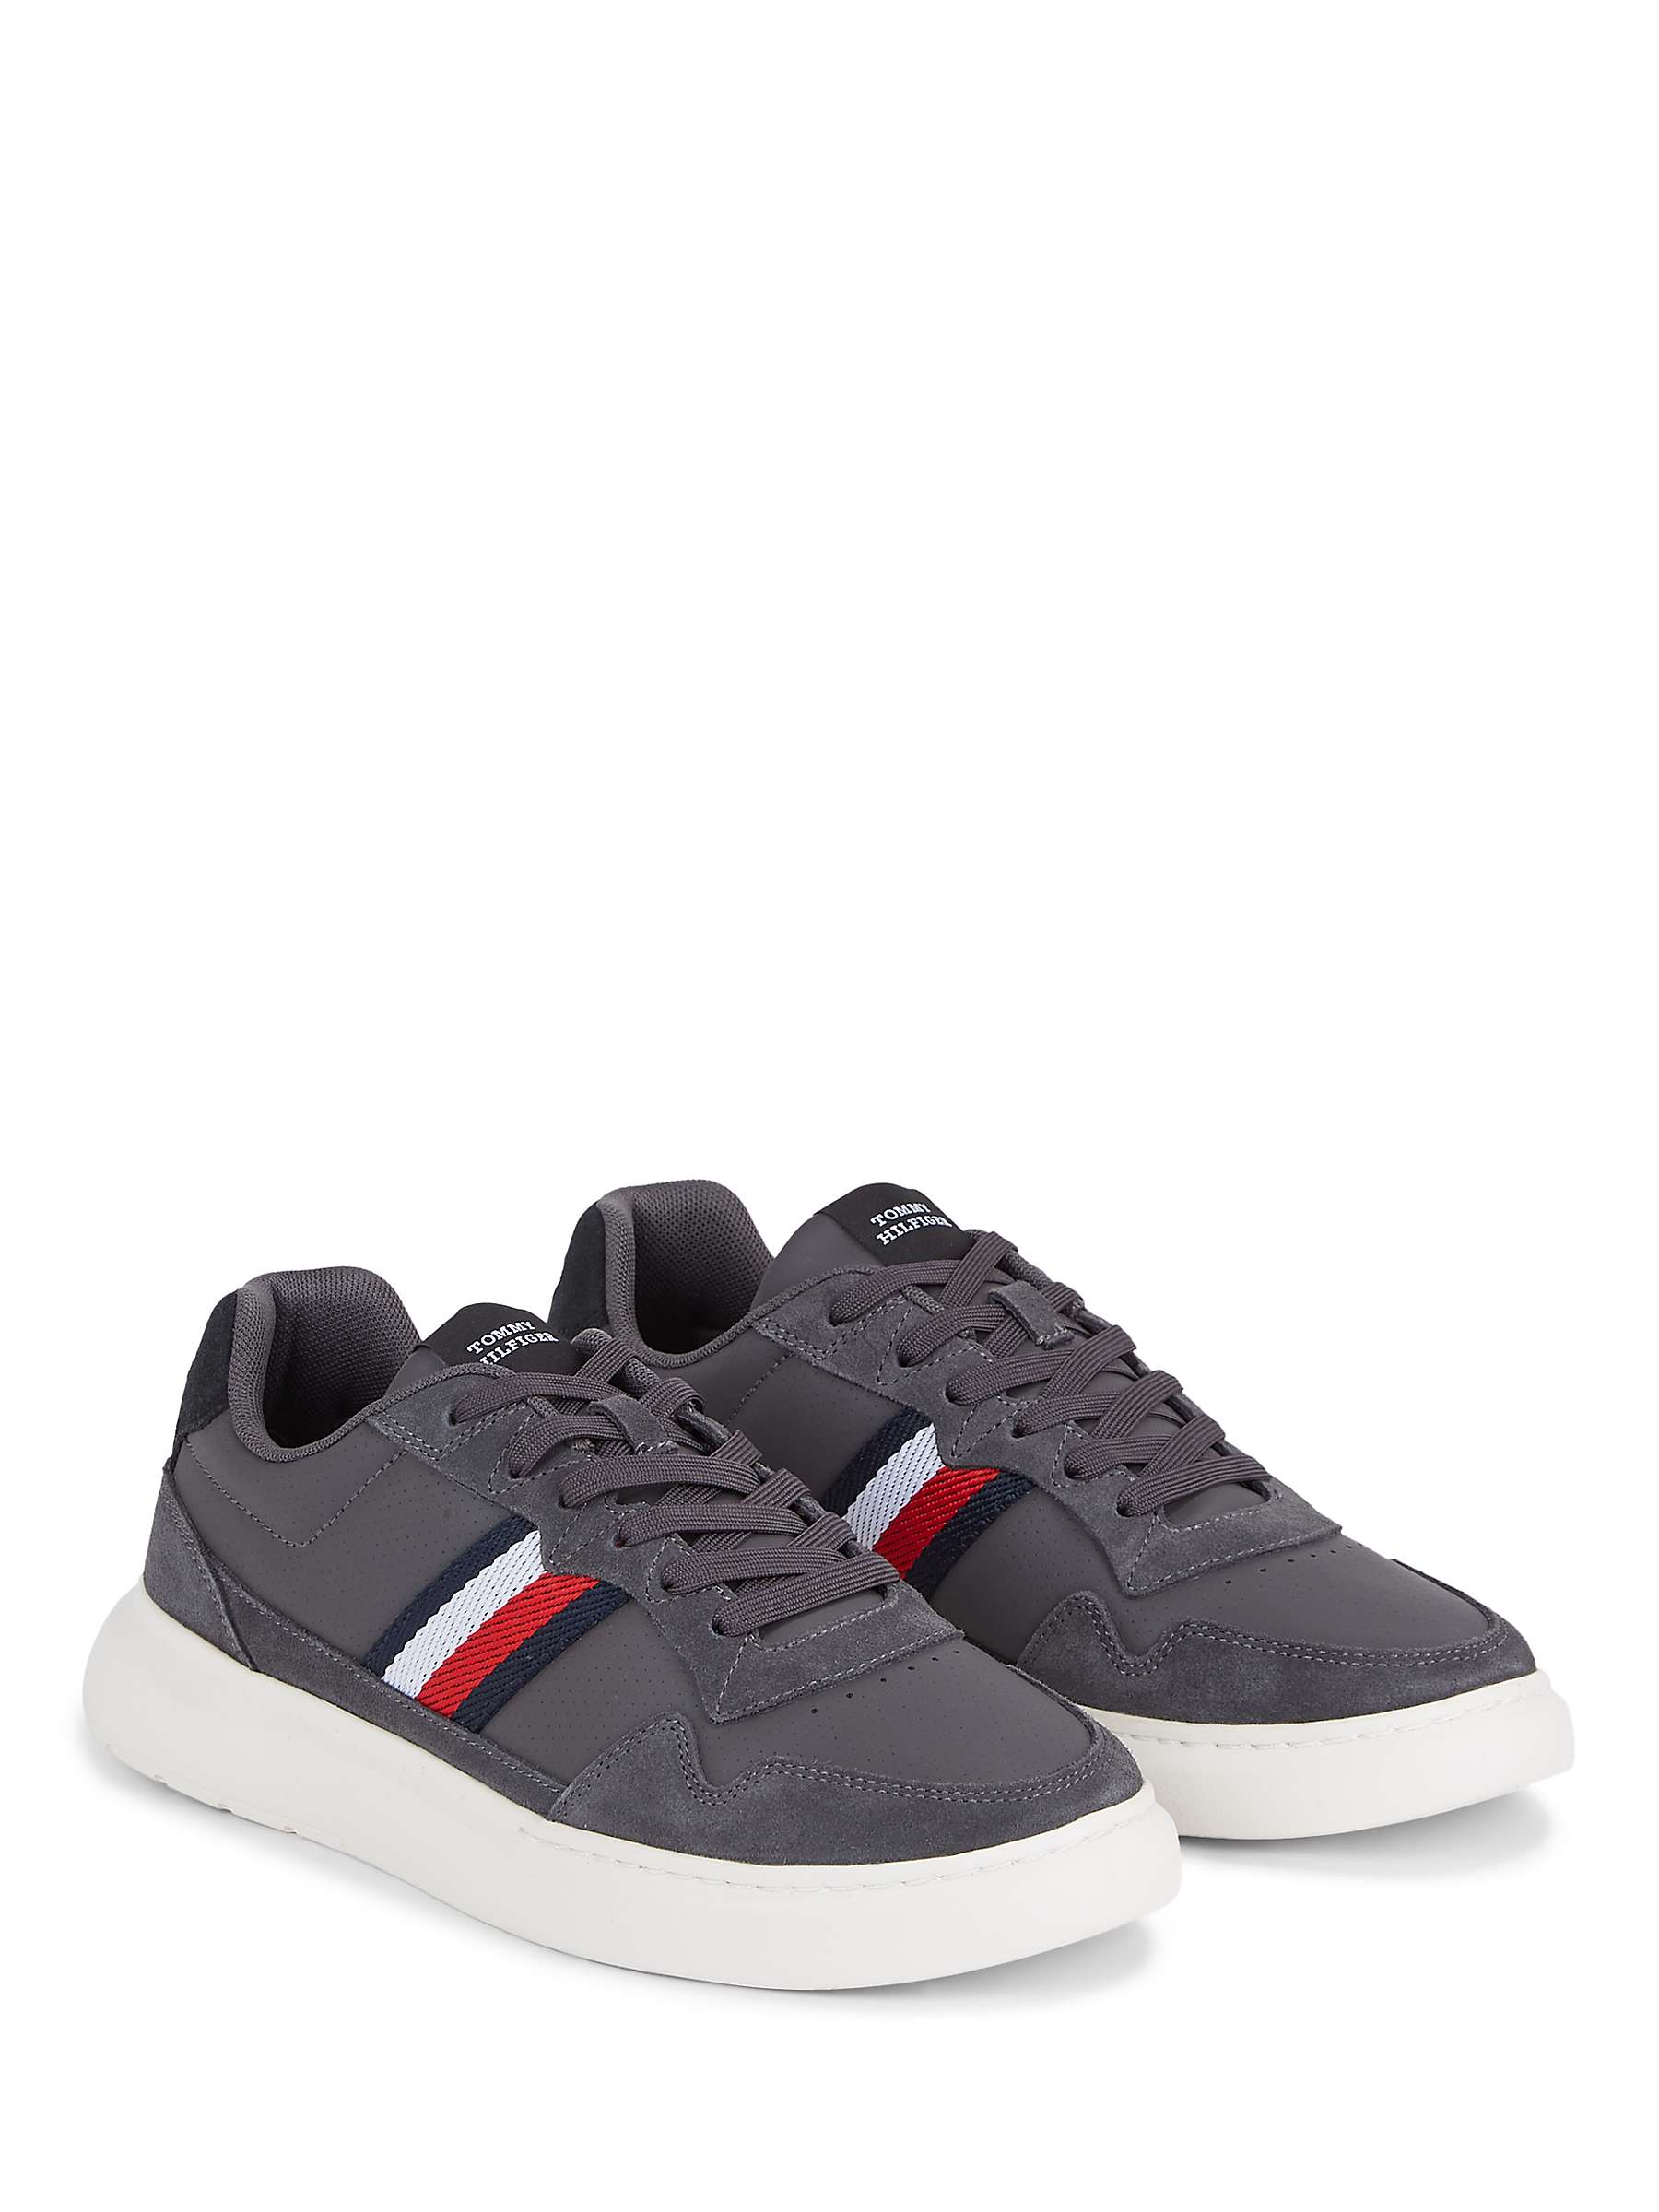 Buy Tommy Hilfiger Mix Stripes Leather Blend Trainers Online at johnlewis.com